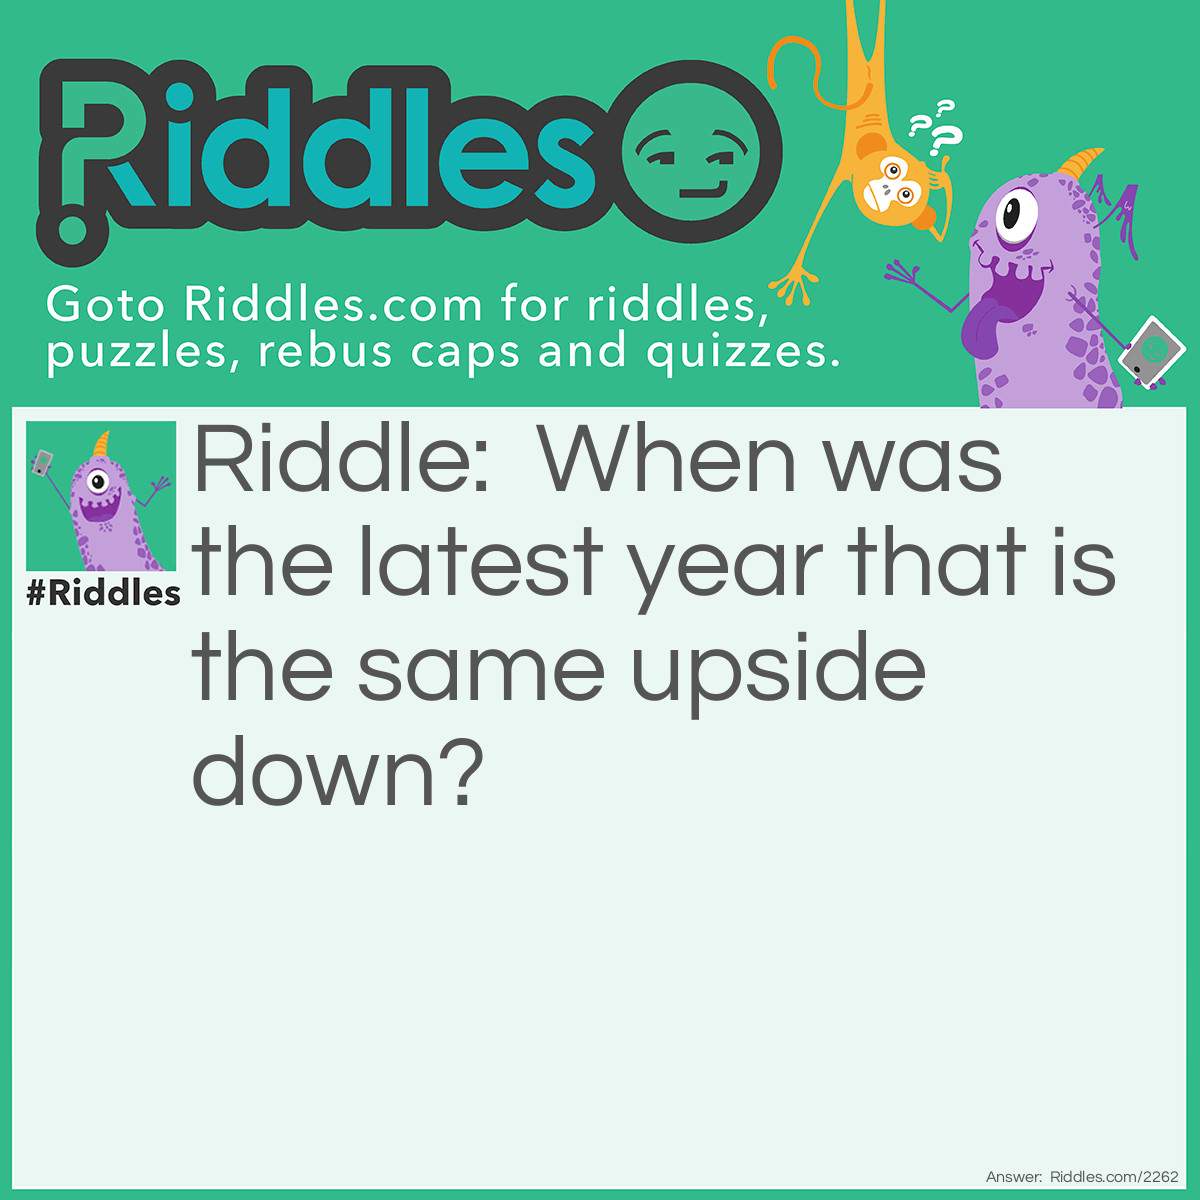 Riddle: When was the latest year that is the same upside down? Answer: 1961.